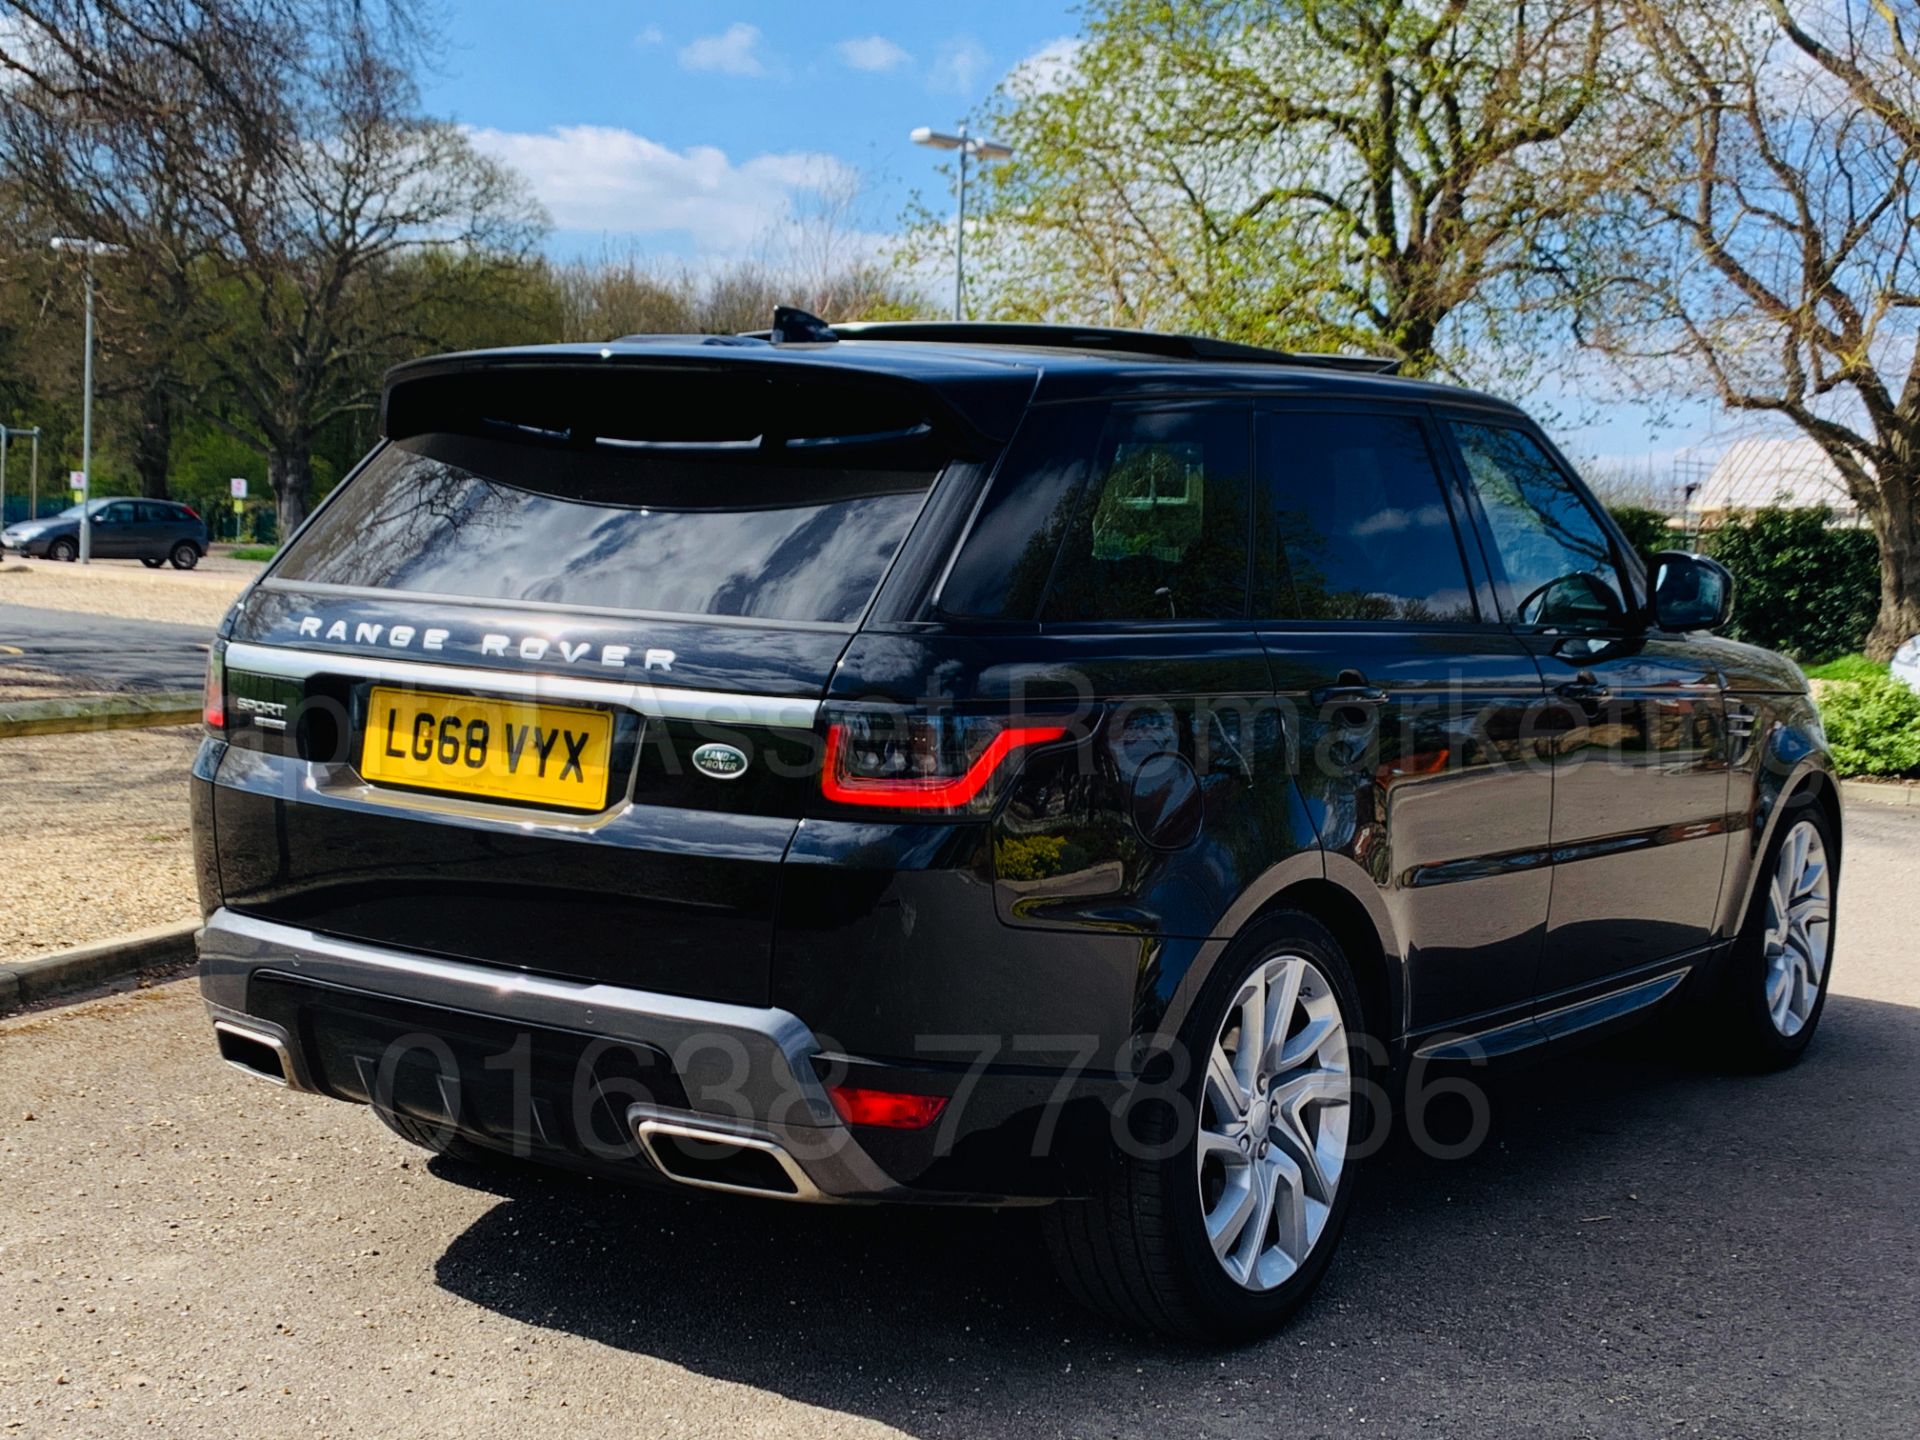 (ON SALE) RANGE ROVER SPORT *HSE* (2019 - ALL NEW MODEL) '3.0 SDV6 - 306 BHP - 8 SPEED AUTO' - Image 10 of 73